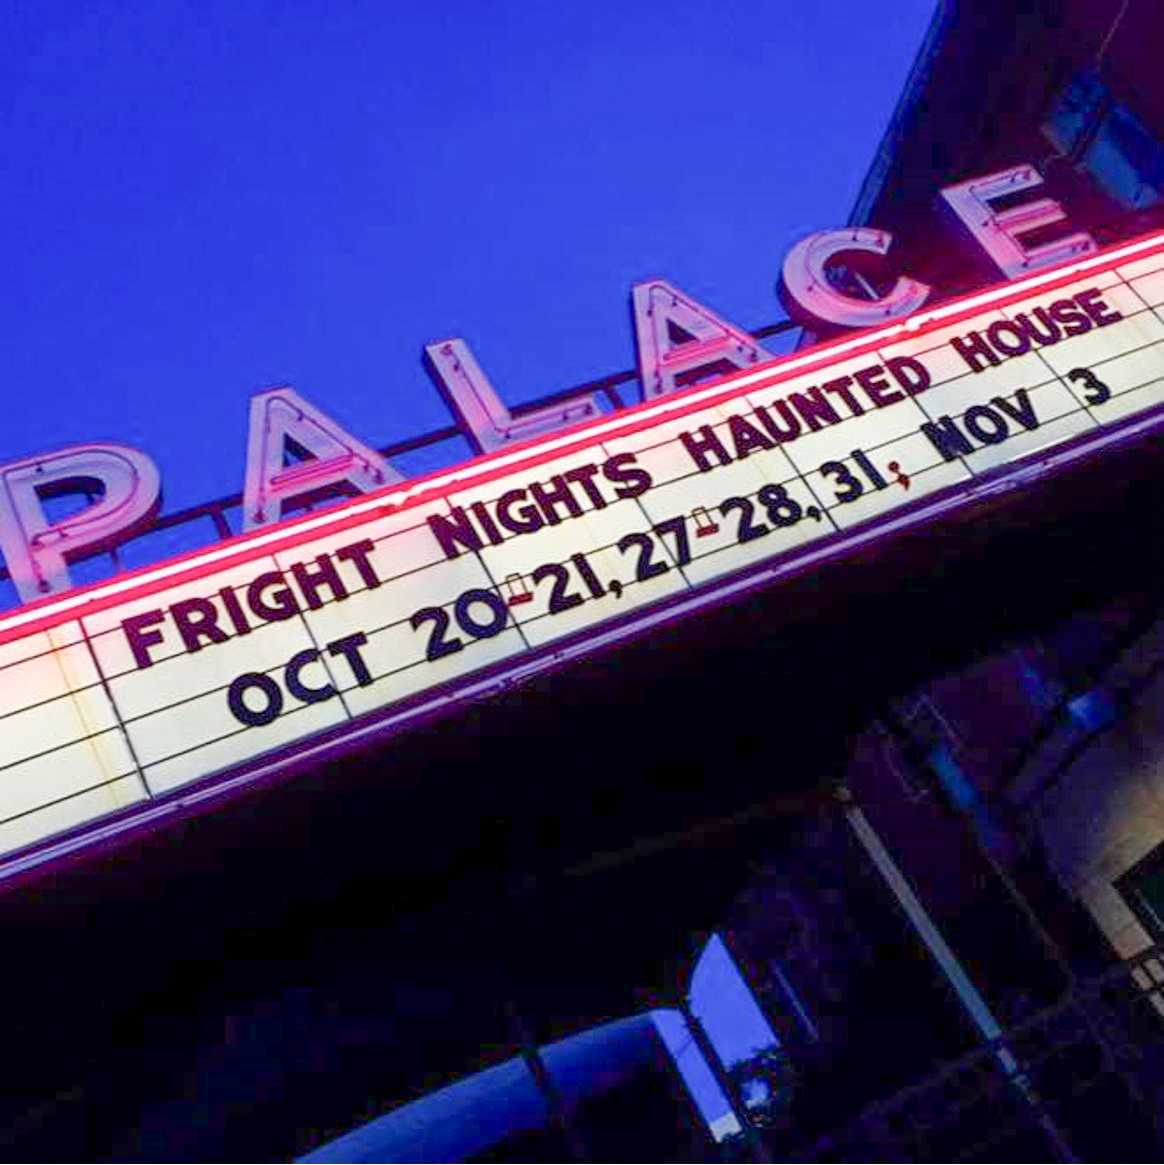 The+Palace+Theater+in+Bryan+is+hosting+the+eighth+annual+Fright+Nights+haunted+house+through+November.%26%23160%3B